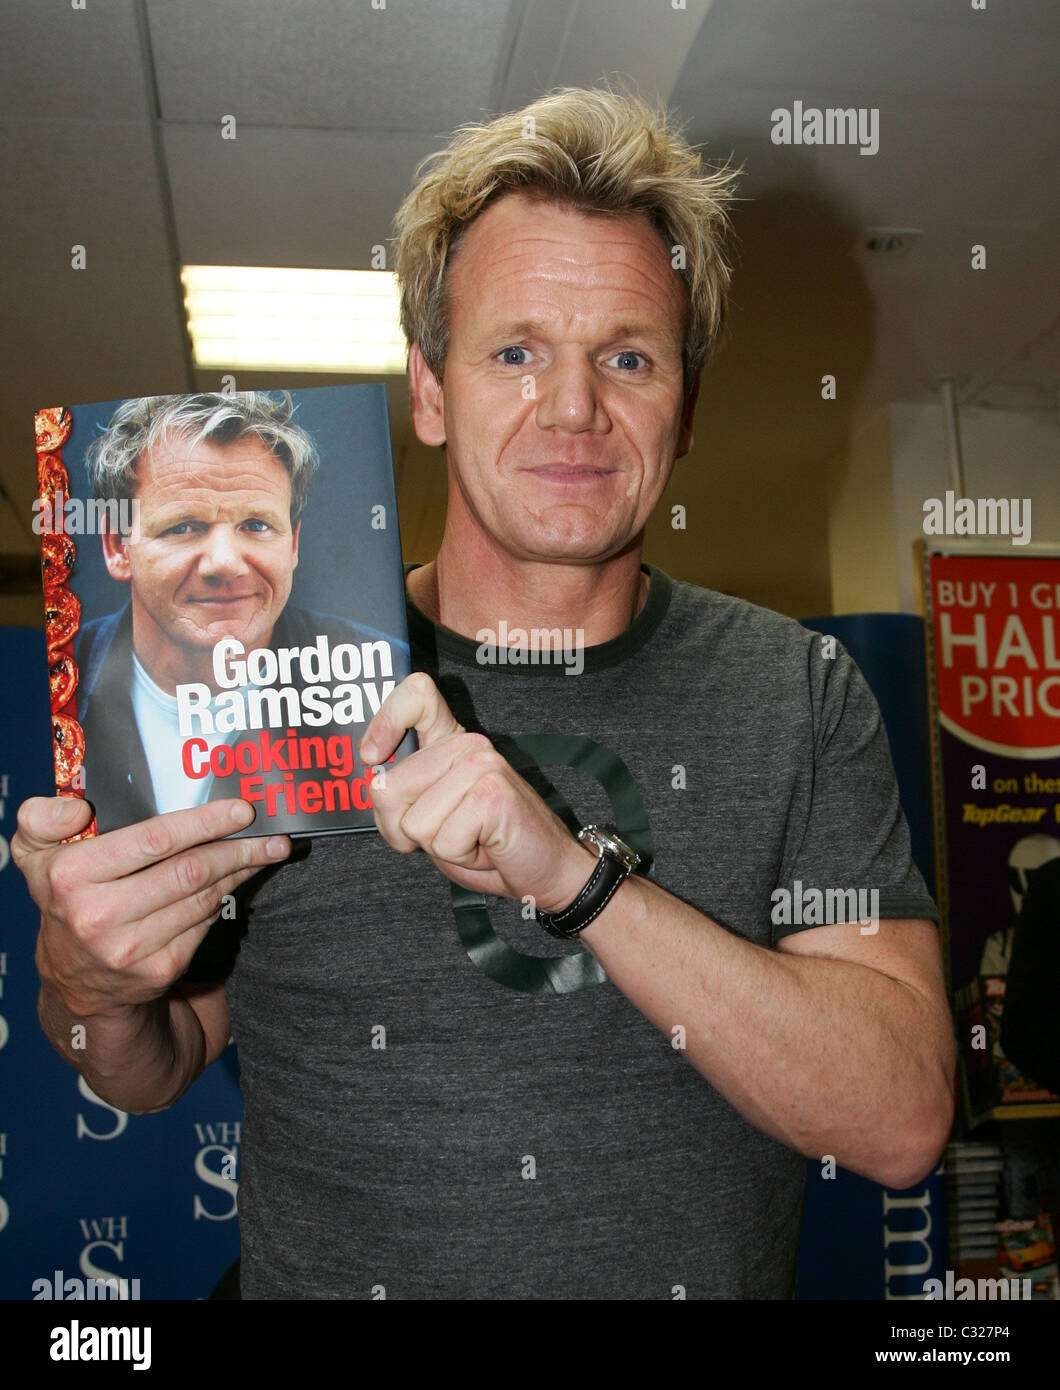 Gordon Ramsay signs copies of his latest book 'Cooking for Friends' at  Waterstone's in the Arndale Centre Manchester, England Stock Photo - Alamy